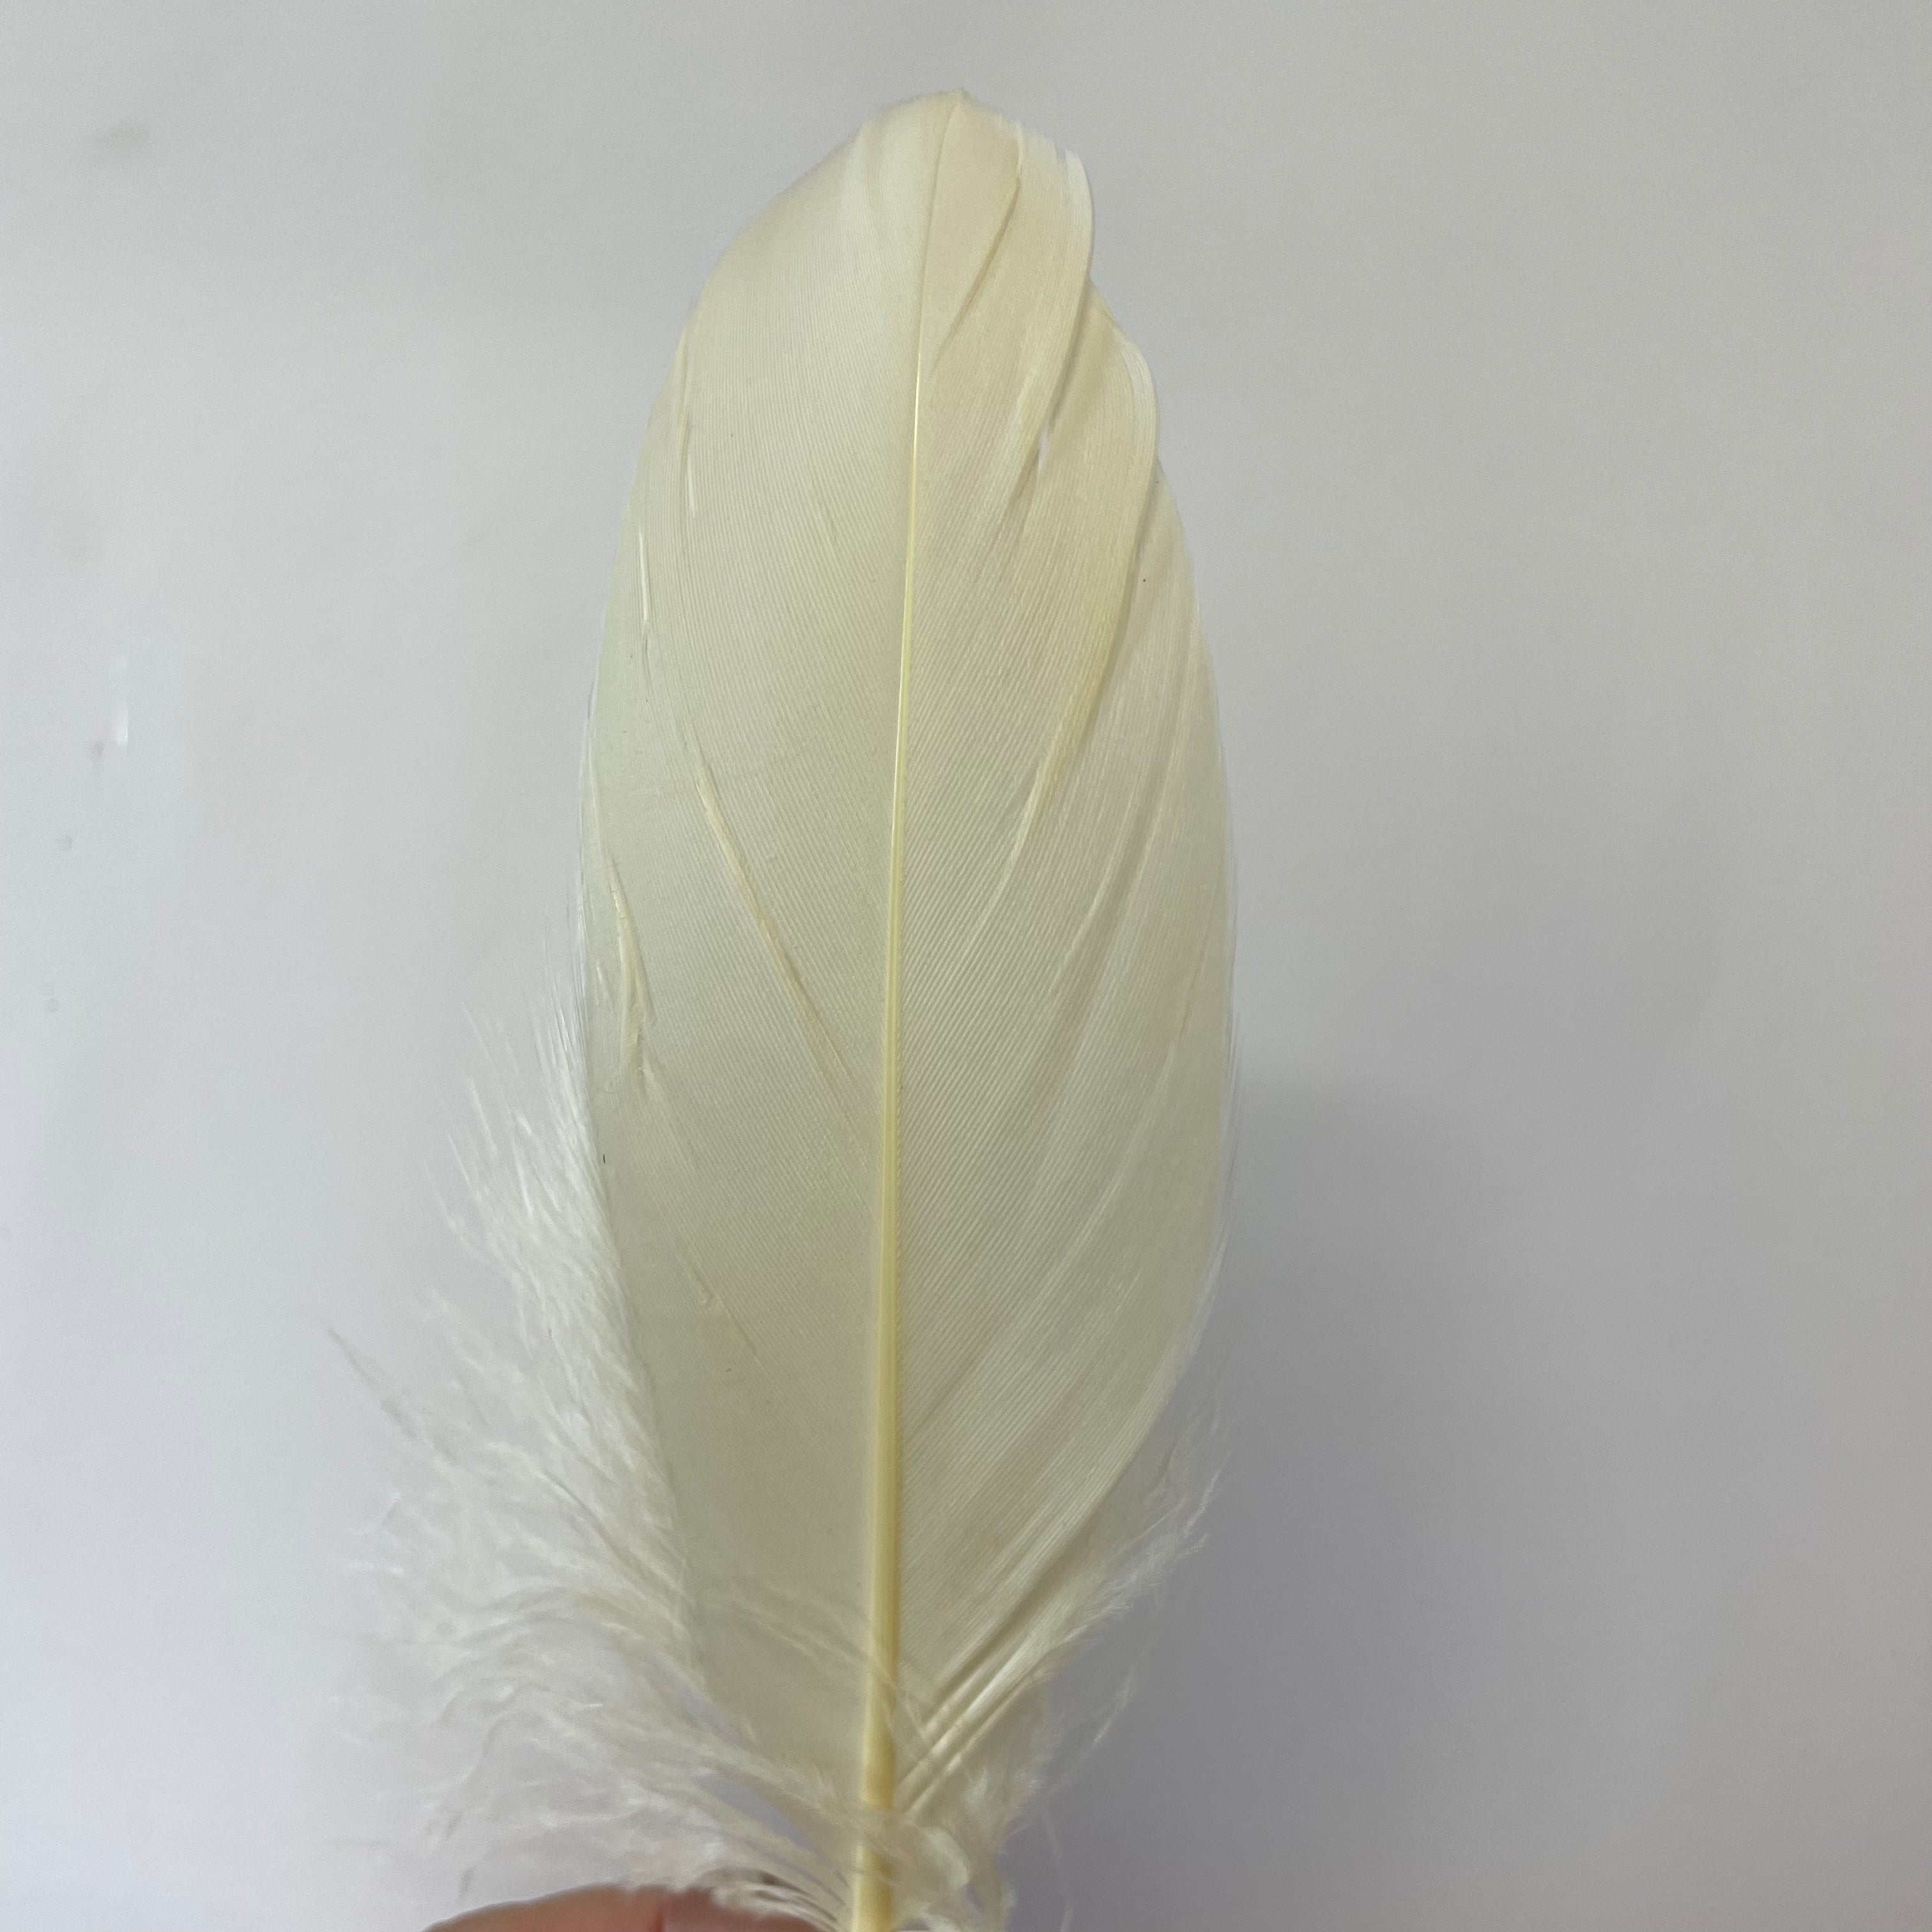 Goose Nagoire Feathers 10 grams - Dark Ivory